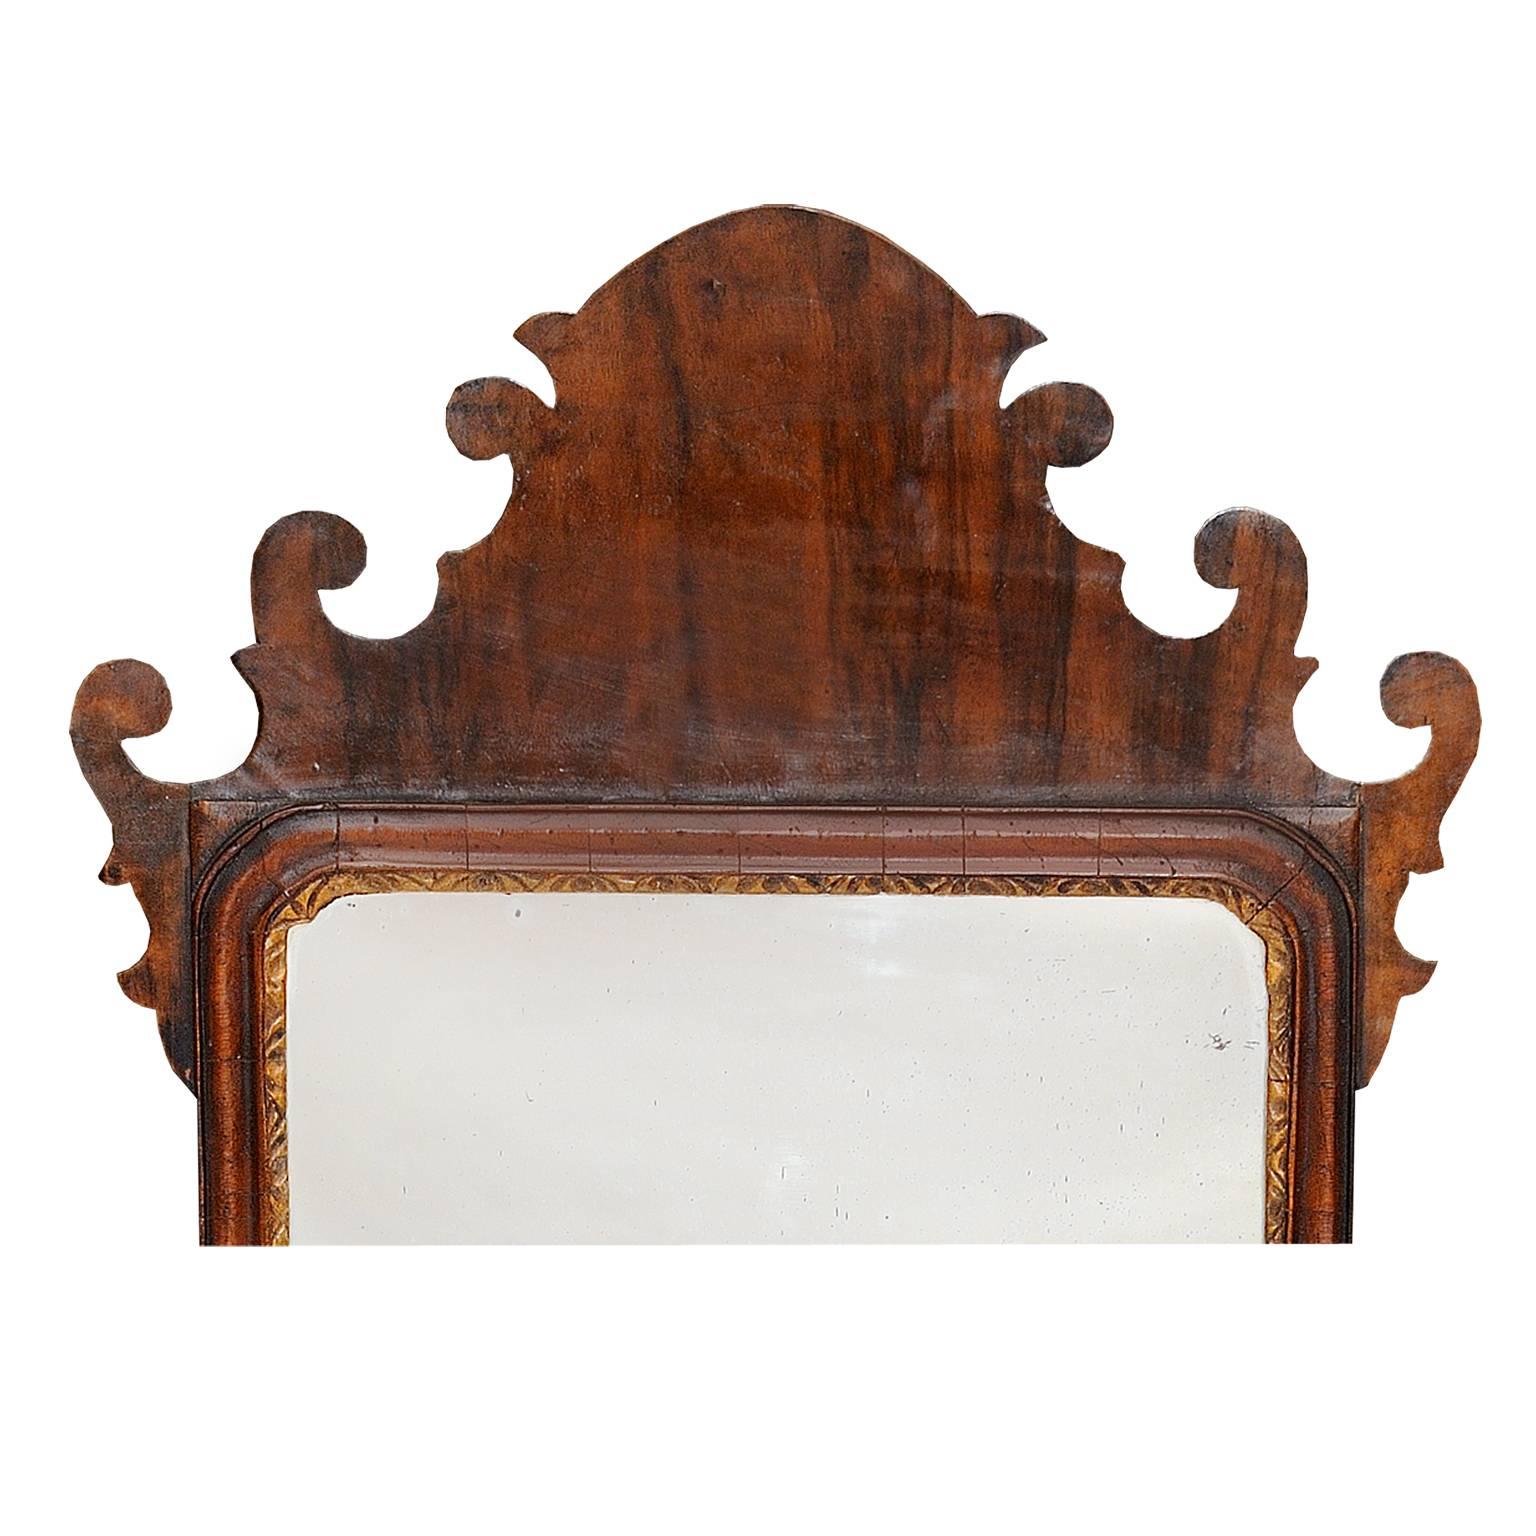 This is a beautiful early 18th century English George II walnut fret mirror with decorative carved giltwood inner border retaining its original mirror plate, circa 1730.